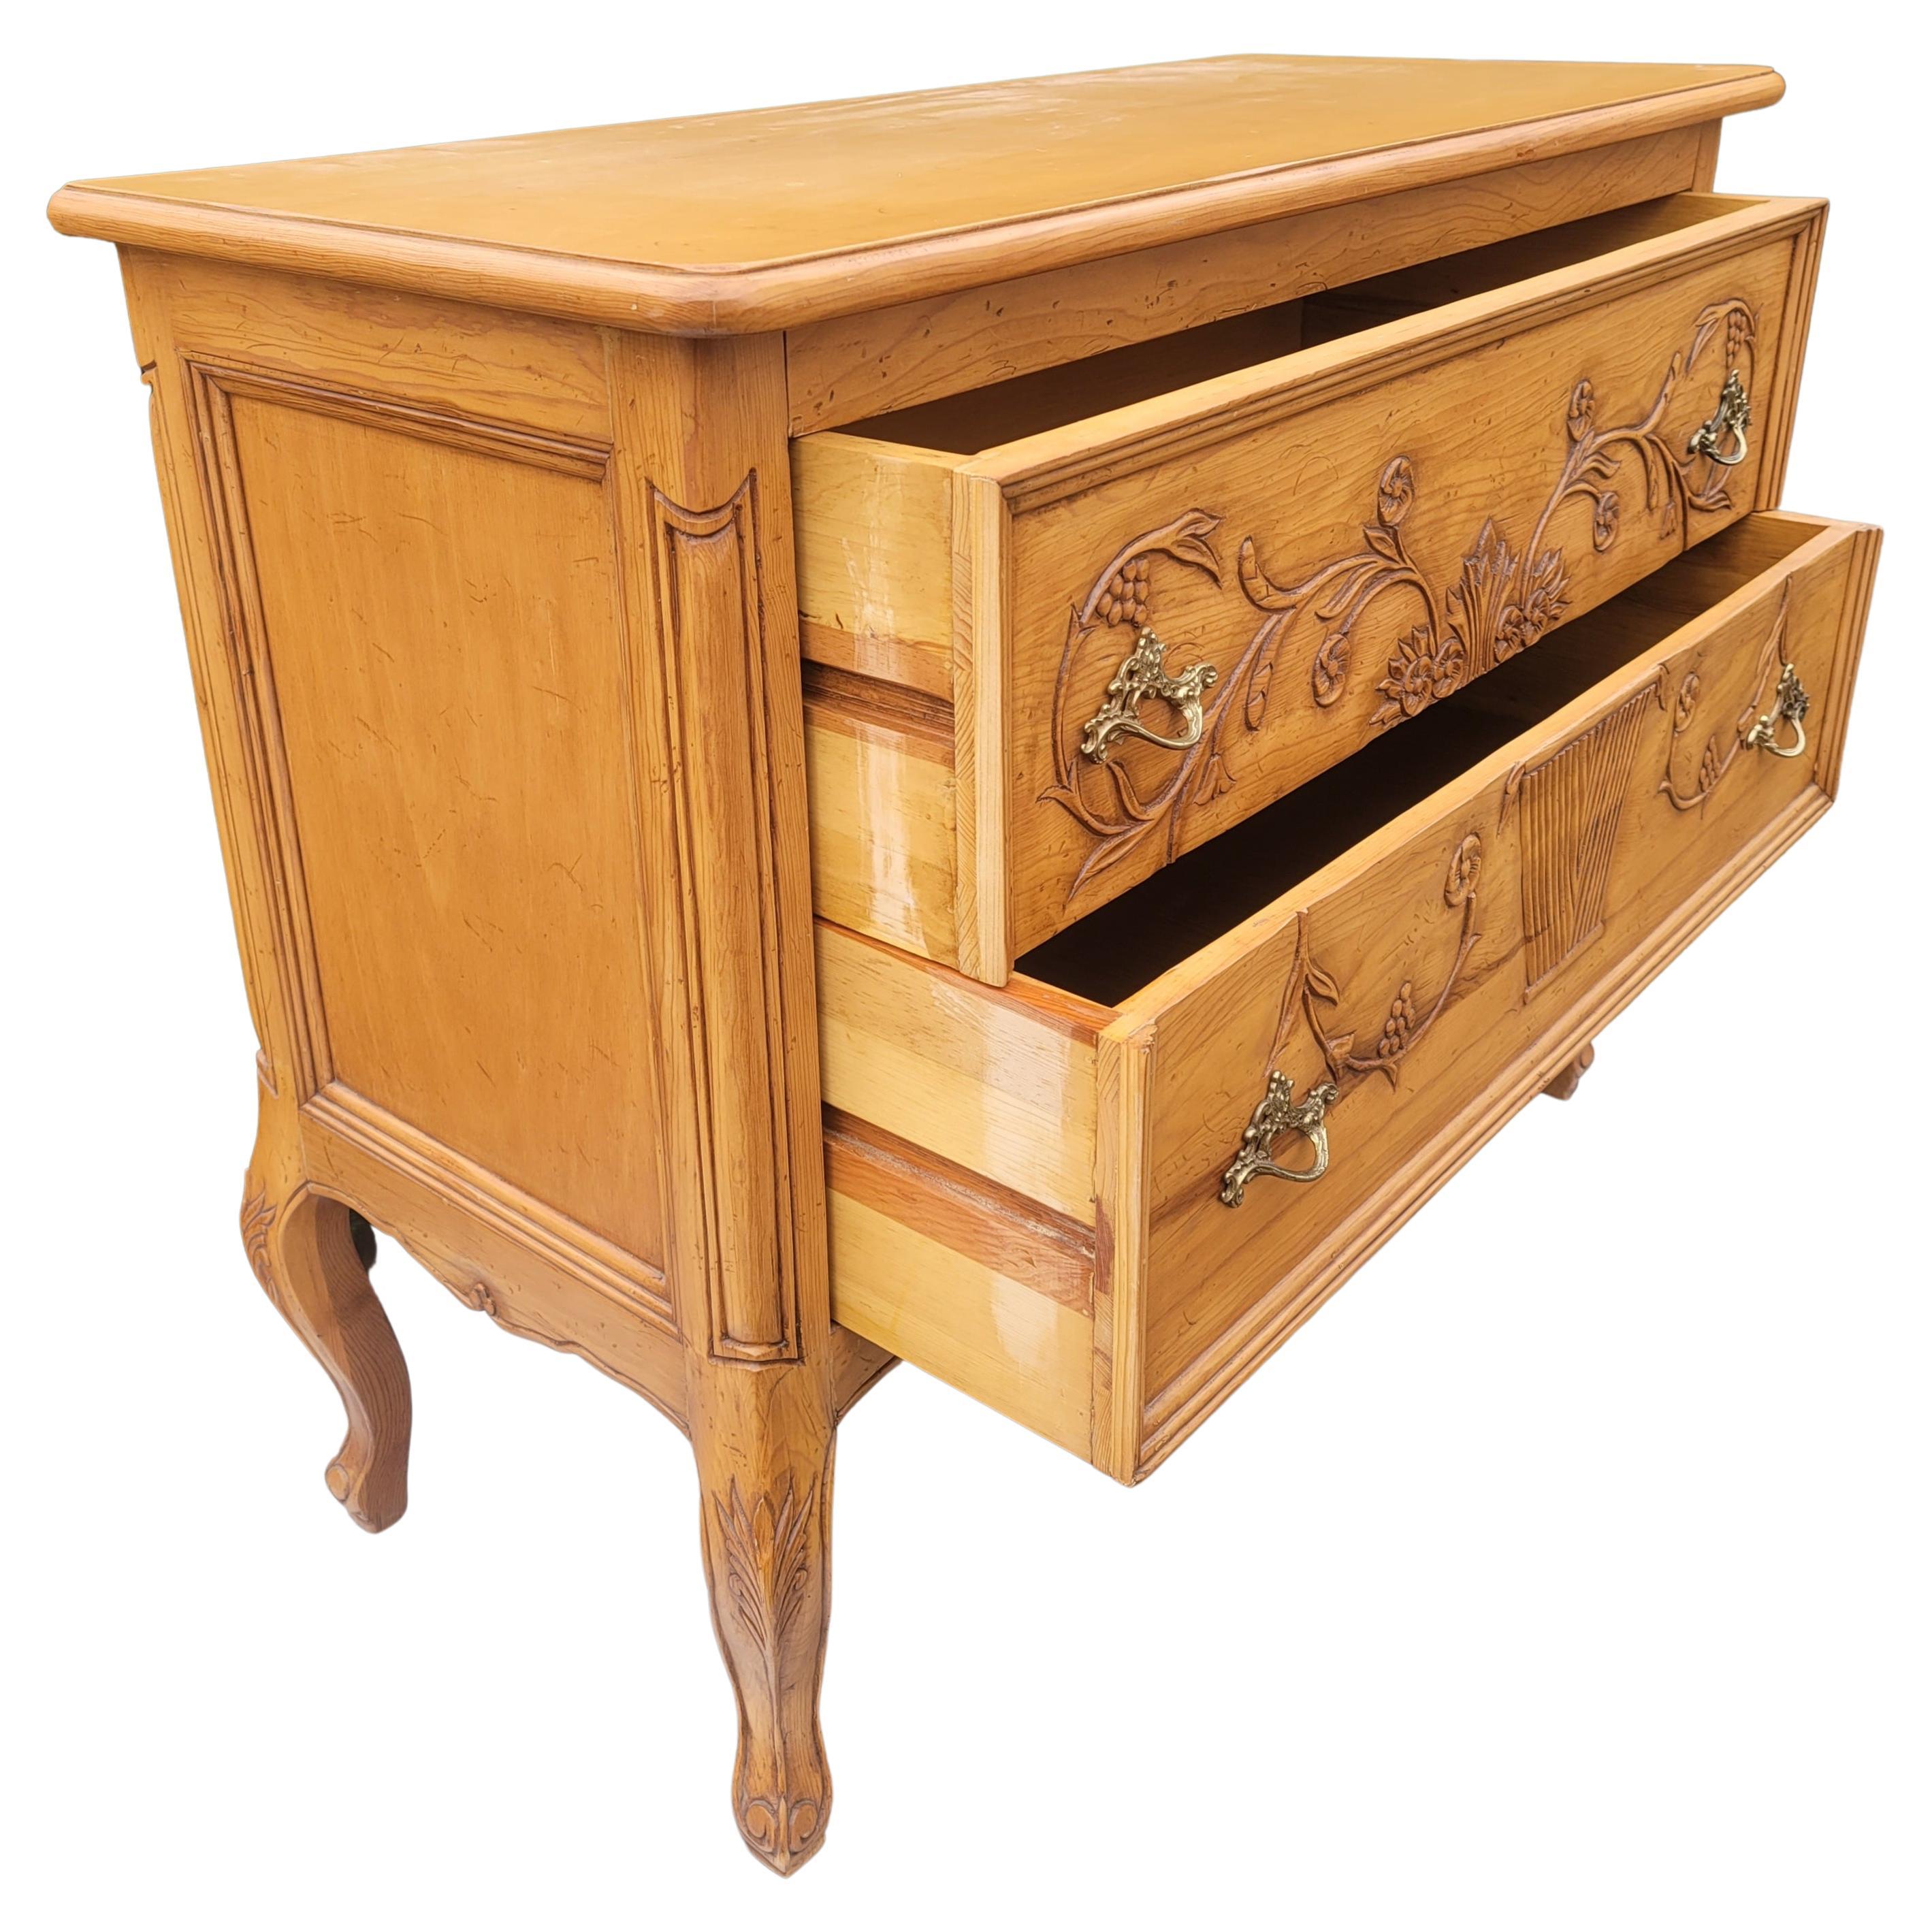 20th Century Wellesley Guild Hand-Carved Hand-Crafted Arts and Crafts Style Fruitwood Commode For Sale